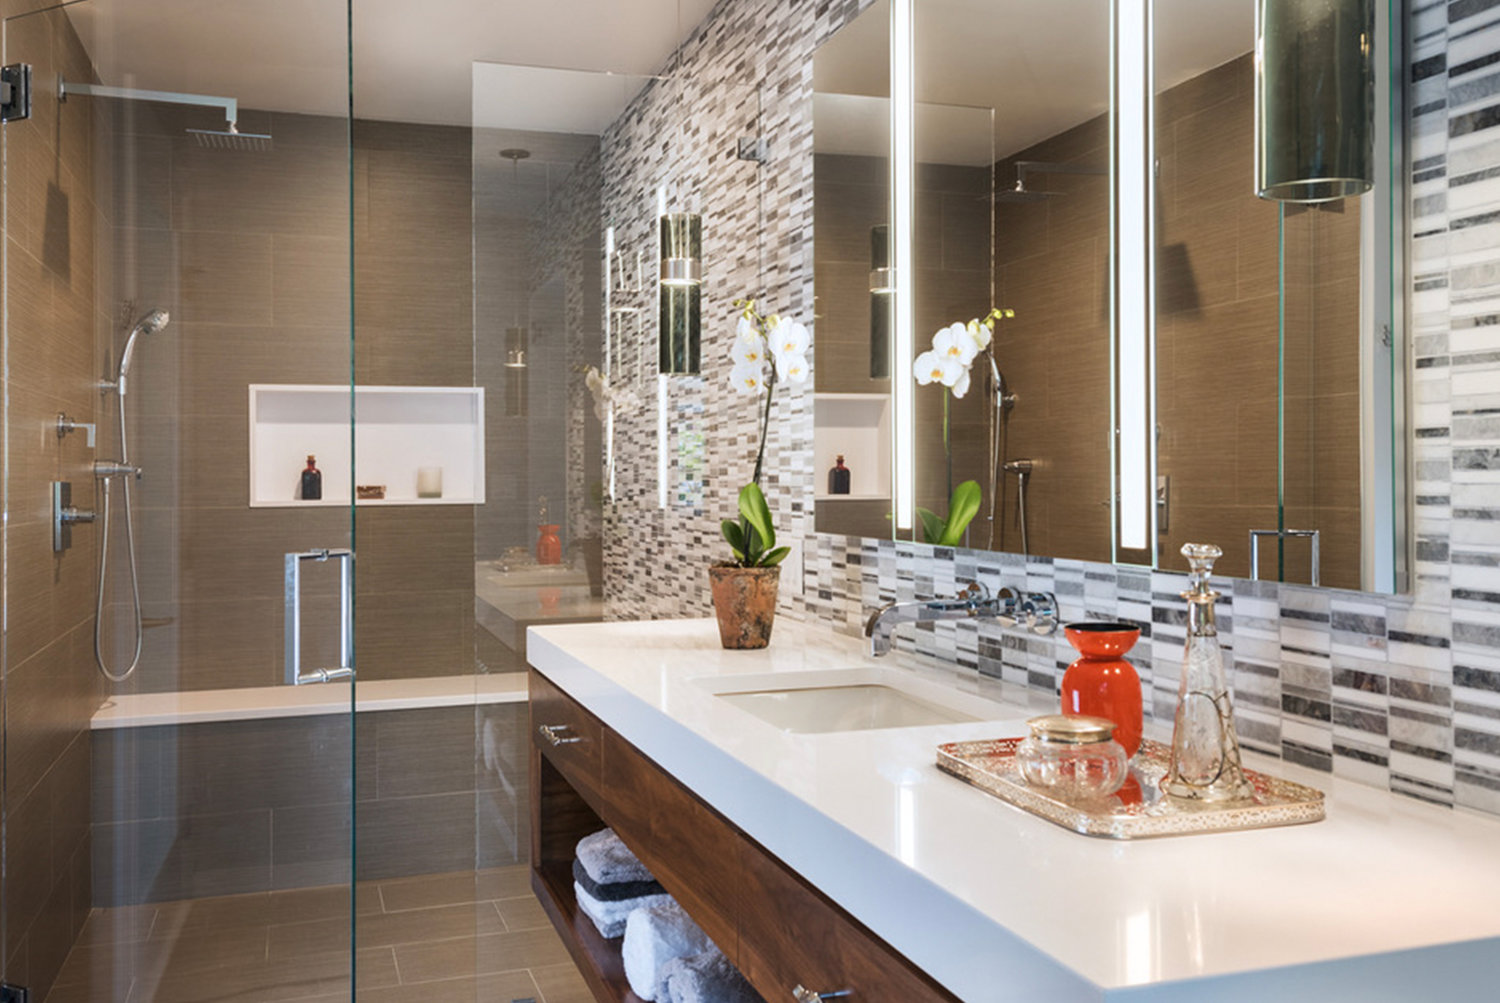 A calming palette of white counter tops, gray and white mosaic stone and glass, and mocha porcelain floors, keeps the single-windowed bathroom light and bright.